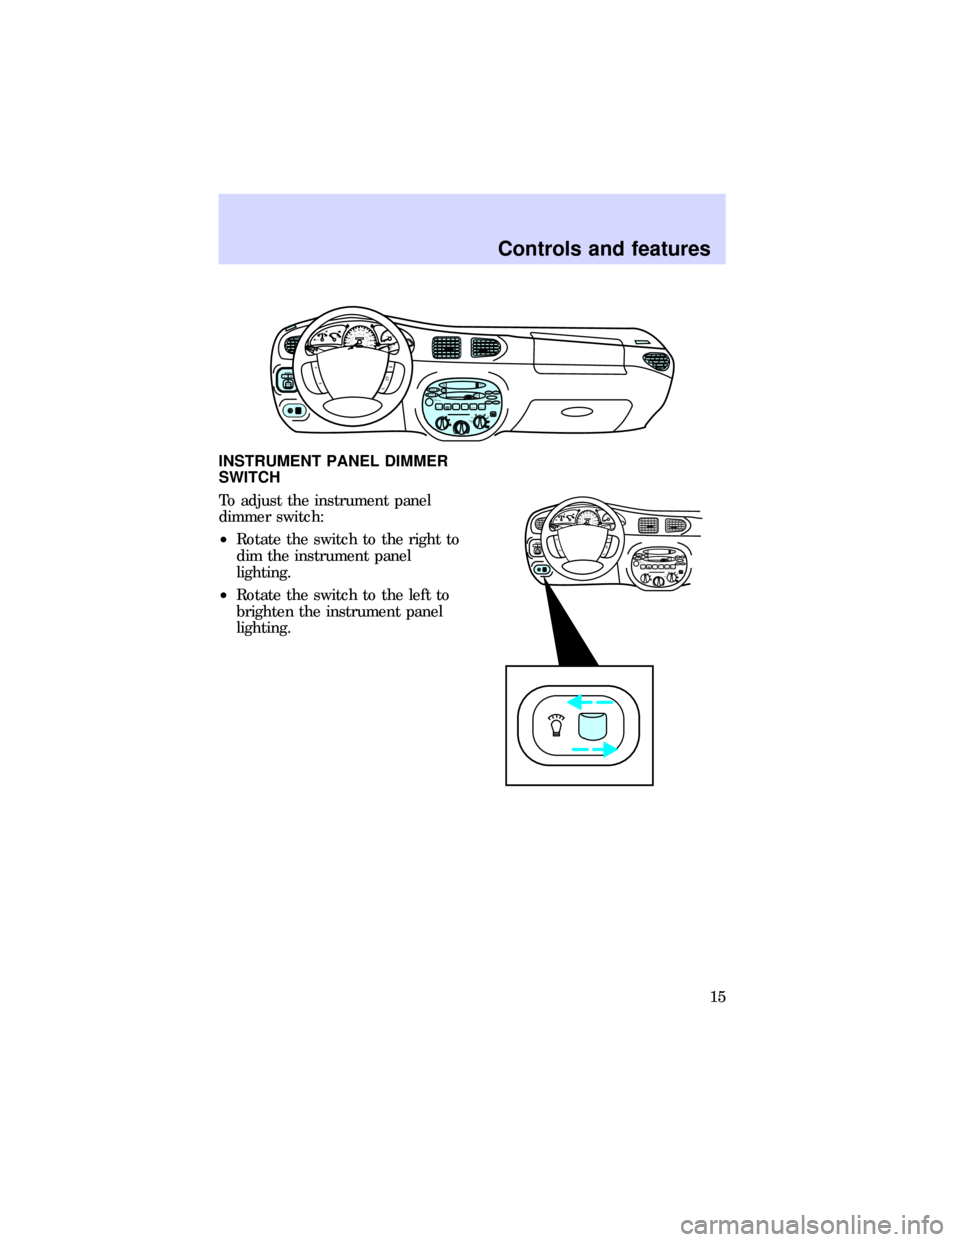 FORD ESCORT 1997 6.G Owners Manual INSTRUMENT PANEL DIMMER
SWITCH
To adjust the instrument panel
dimmer switch:
²Rotate the switch to the right to
dim the instrument panel
lighting.
²Rotate the switch to the left to
brighten the inst